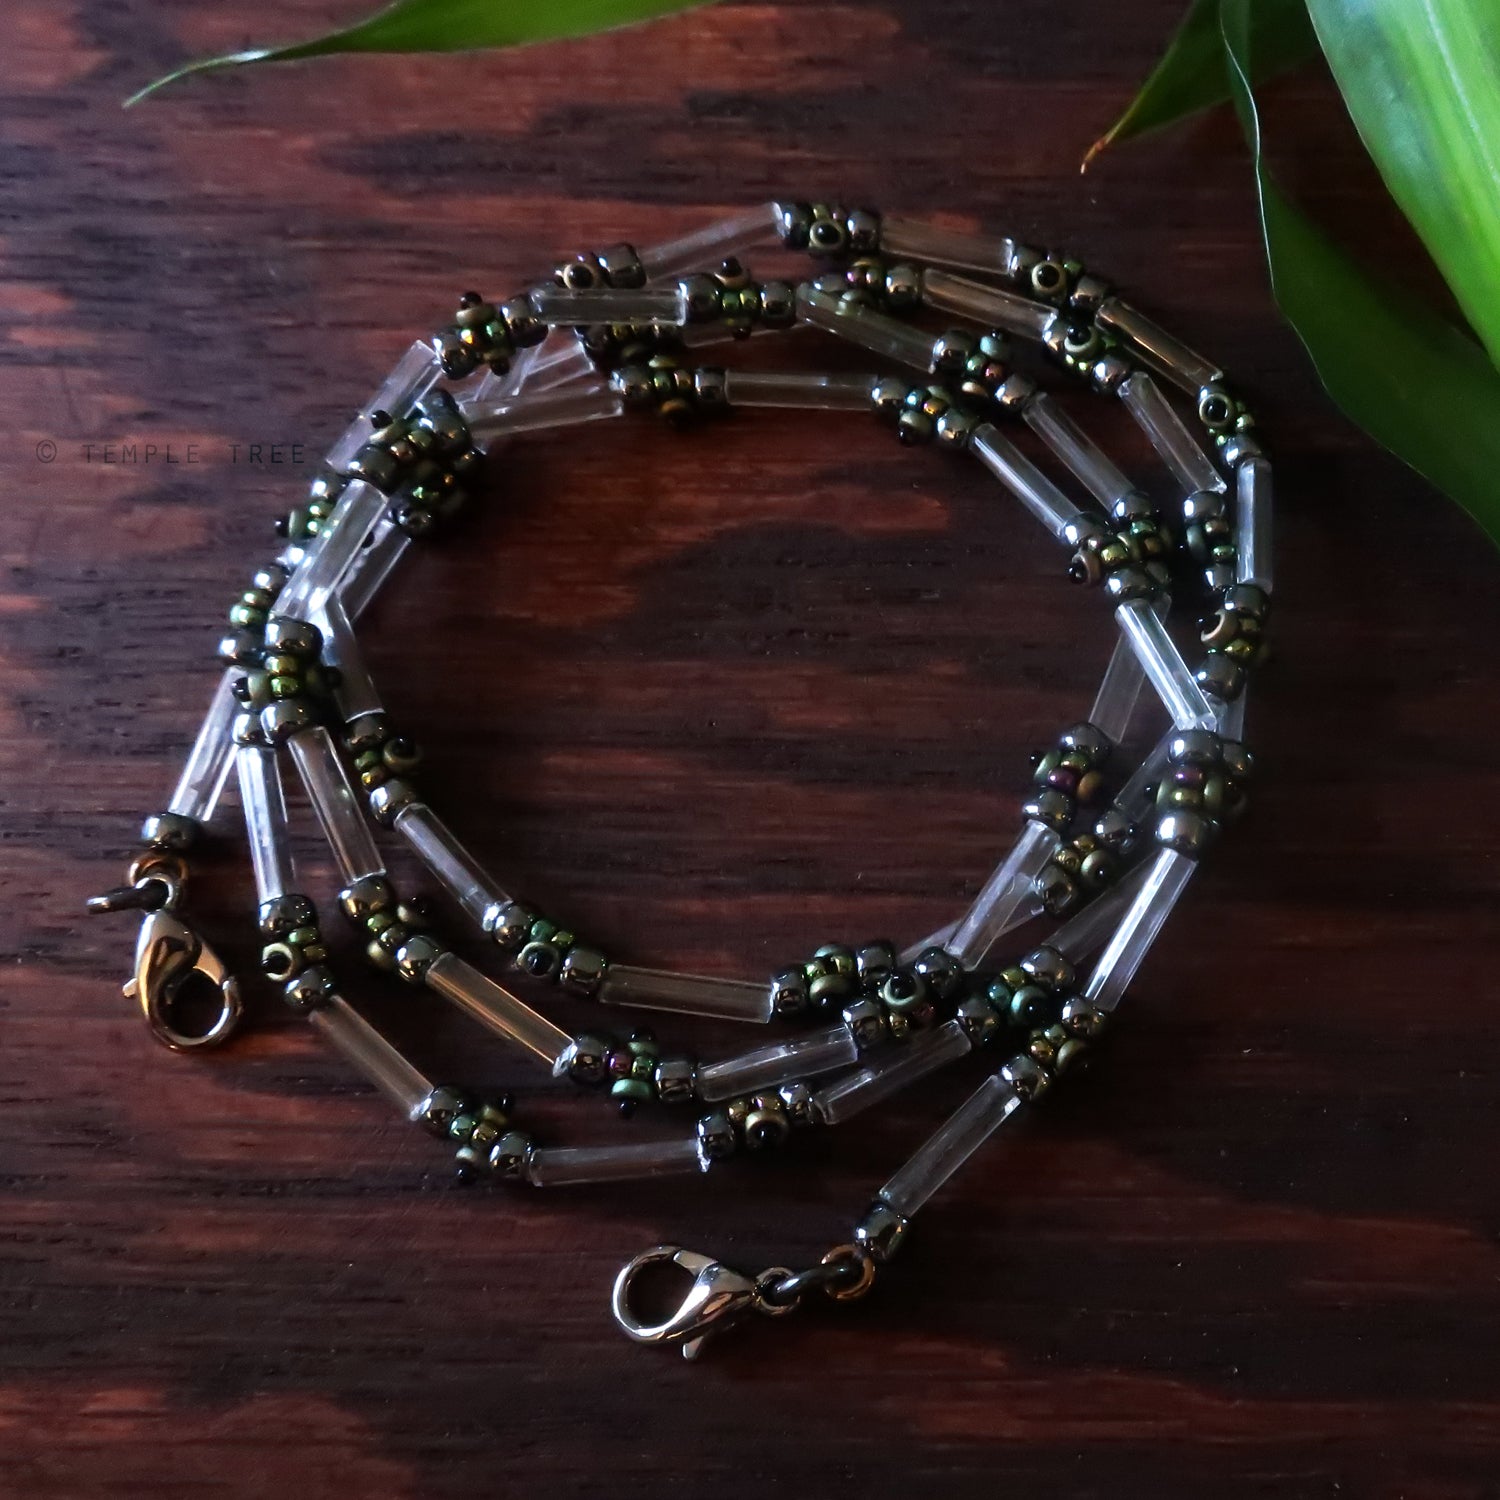 Temple Tree Lost Circuitry Beadwoven Lanyard with Rivets - trAnsist0r 38v1